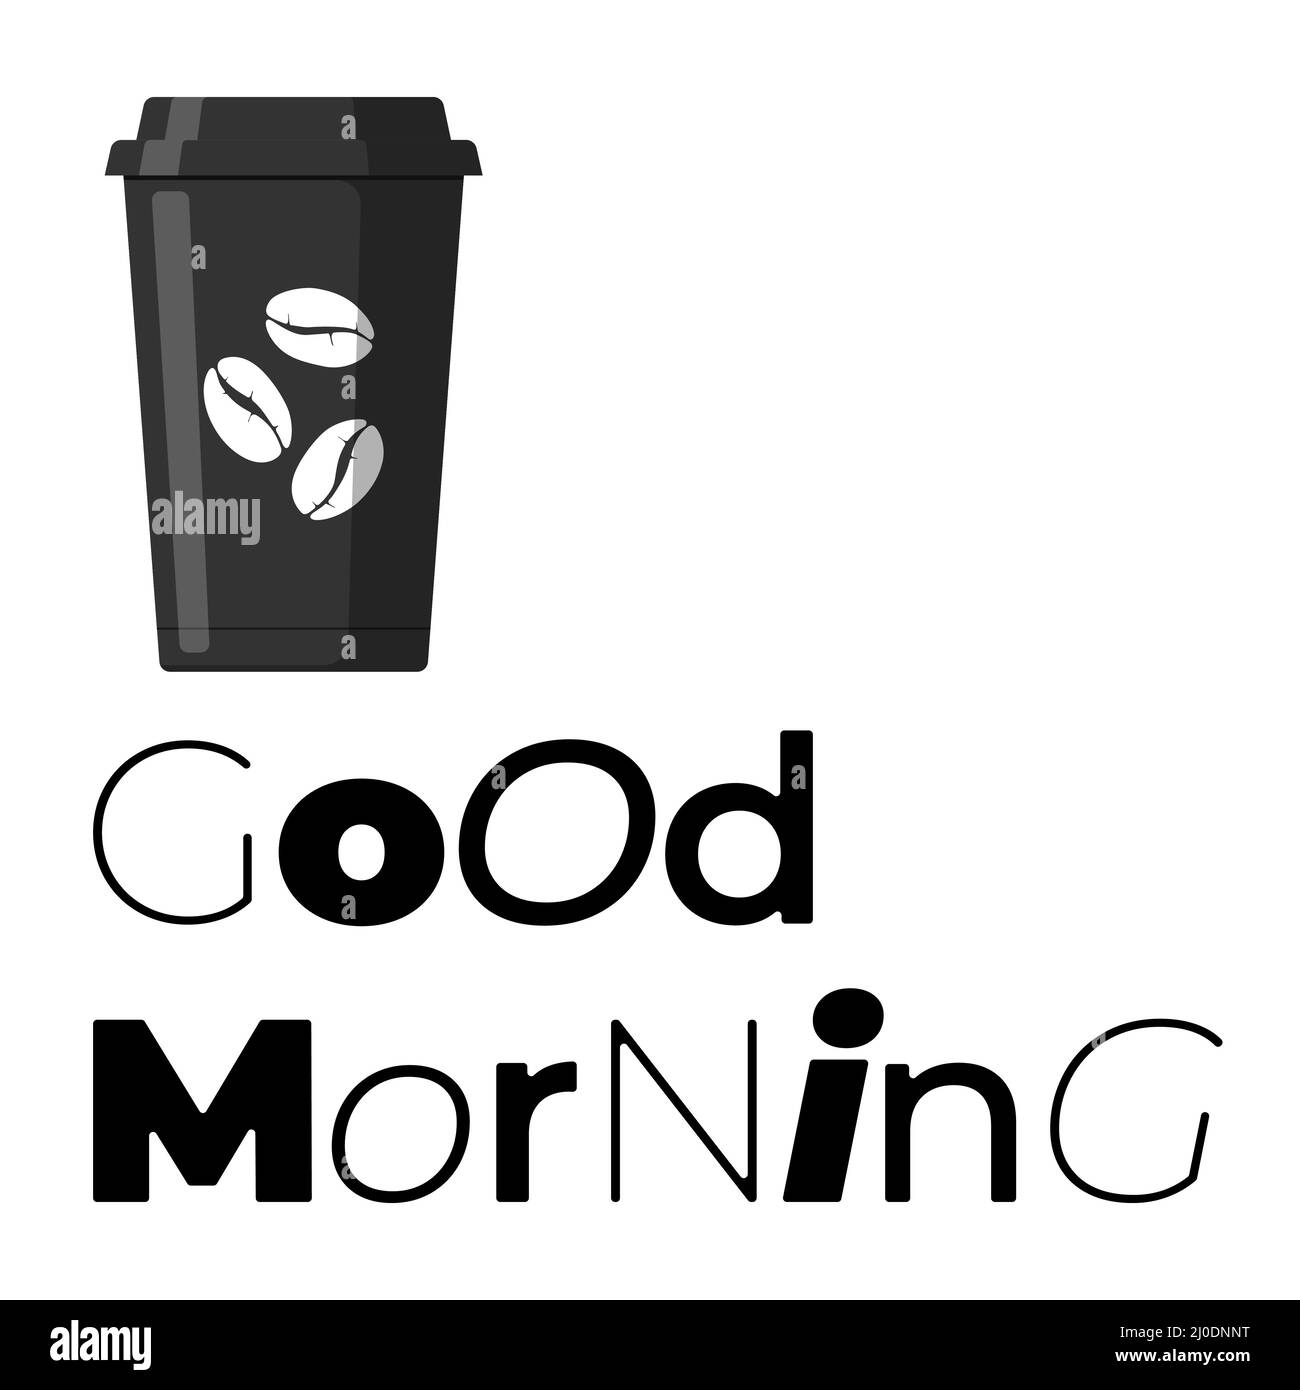 Good morning graphic text and disposable coffee cup banner. Minimal design poster. Vector eps square illustration on white background Stock Vector